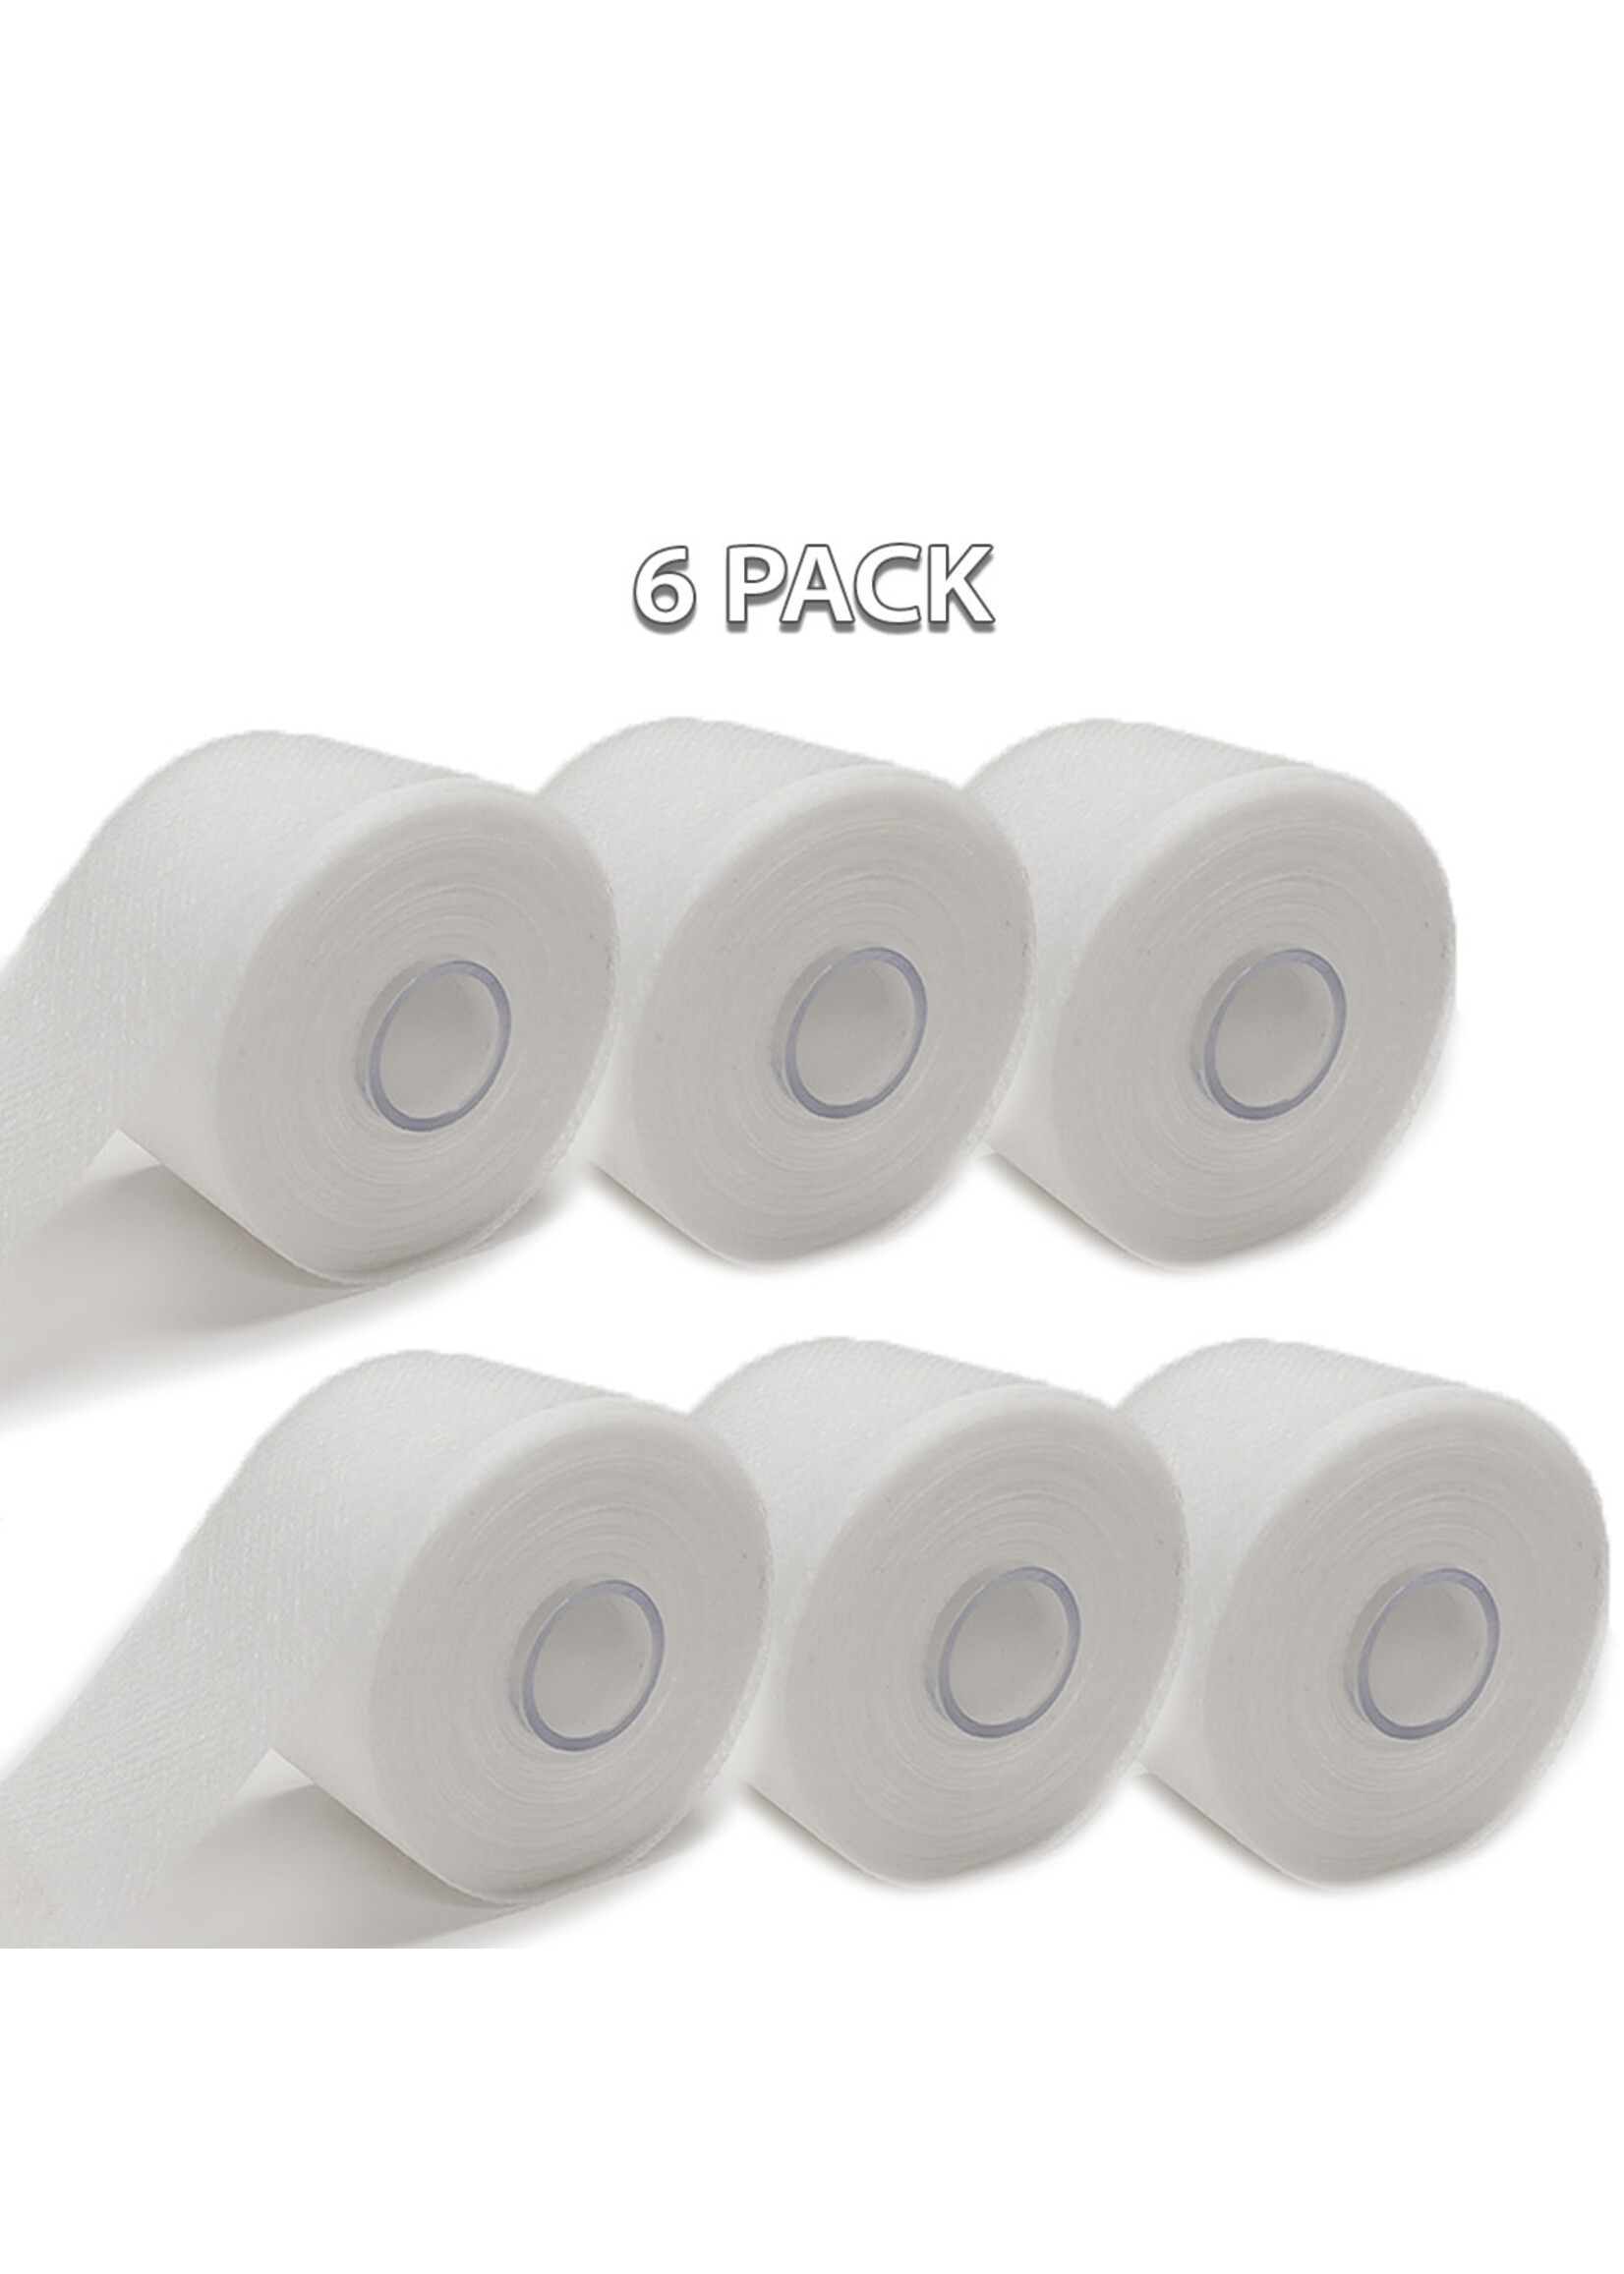 Innovative Marine NUVO ROLLER DESKTOP REPLACEMENT ROLL 6 PACK